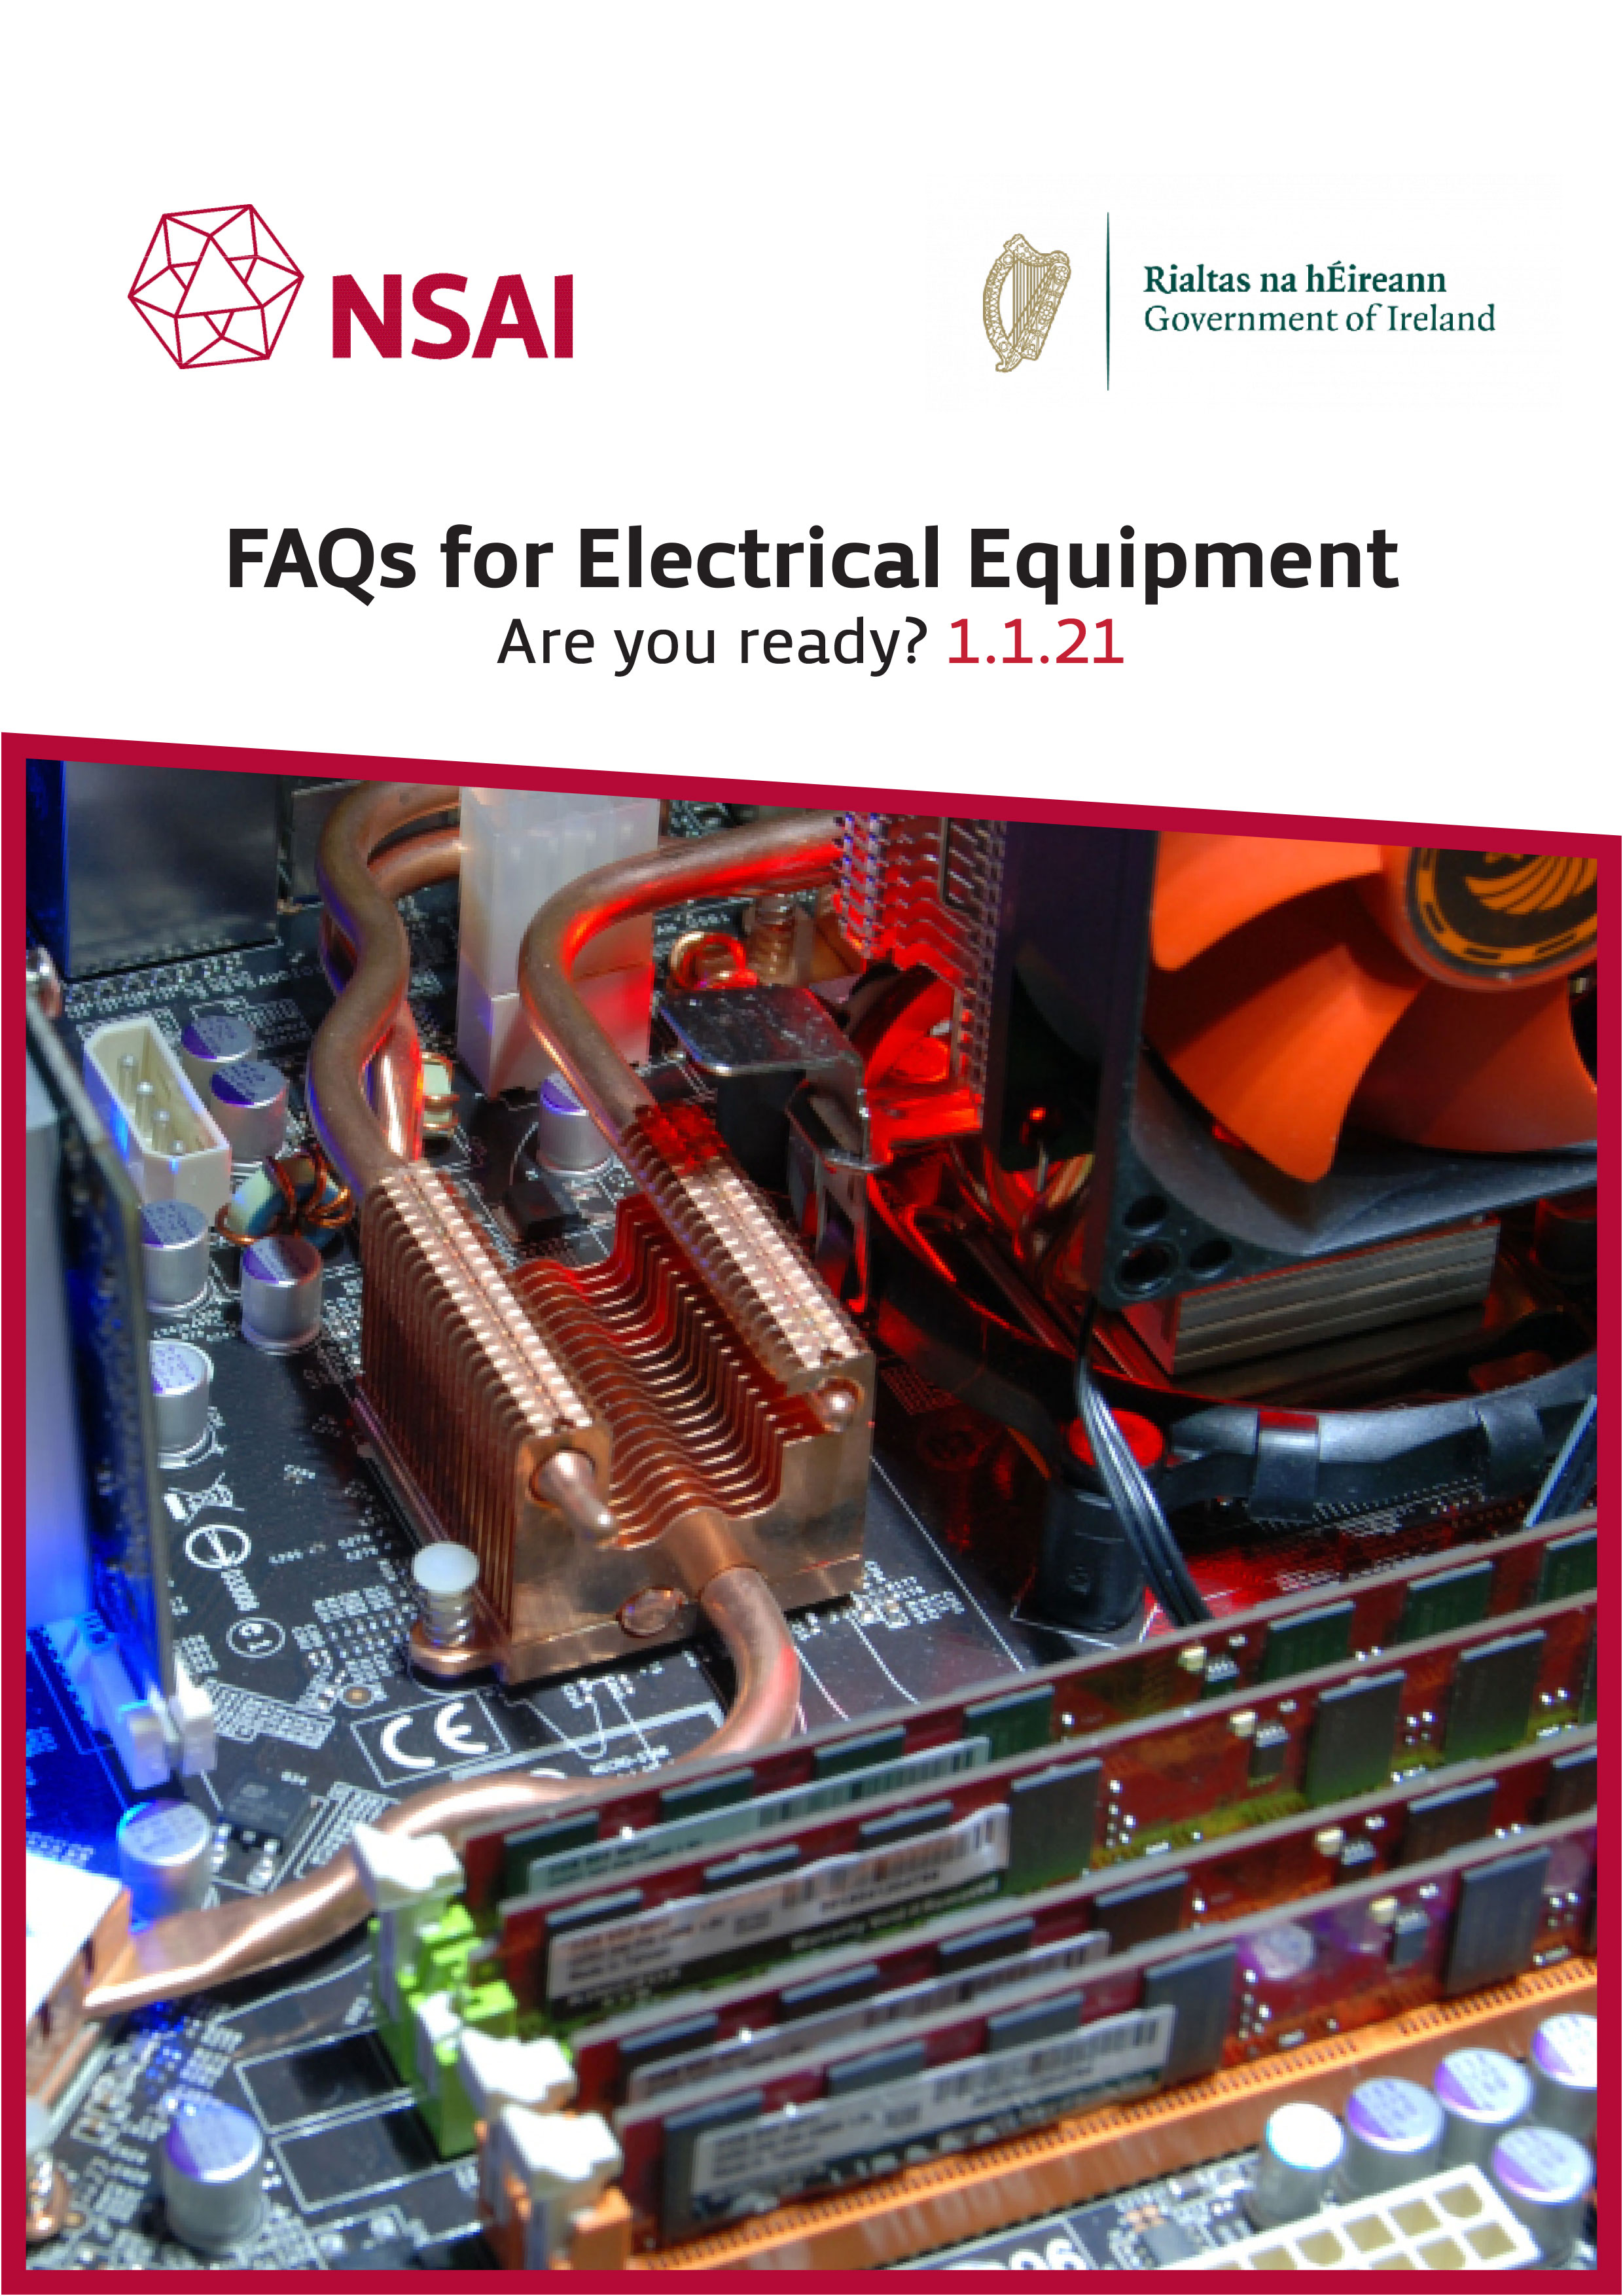 FAQs for Electrical Equipment Are you ready? 1.1.21